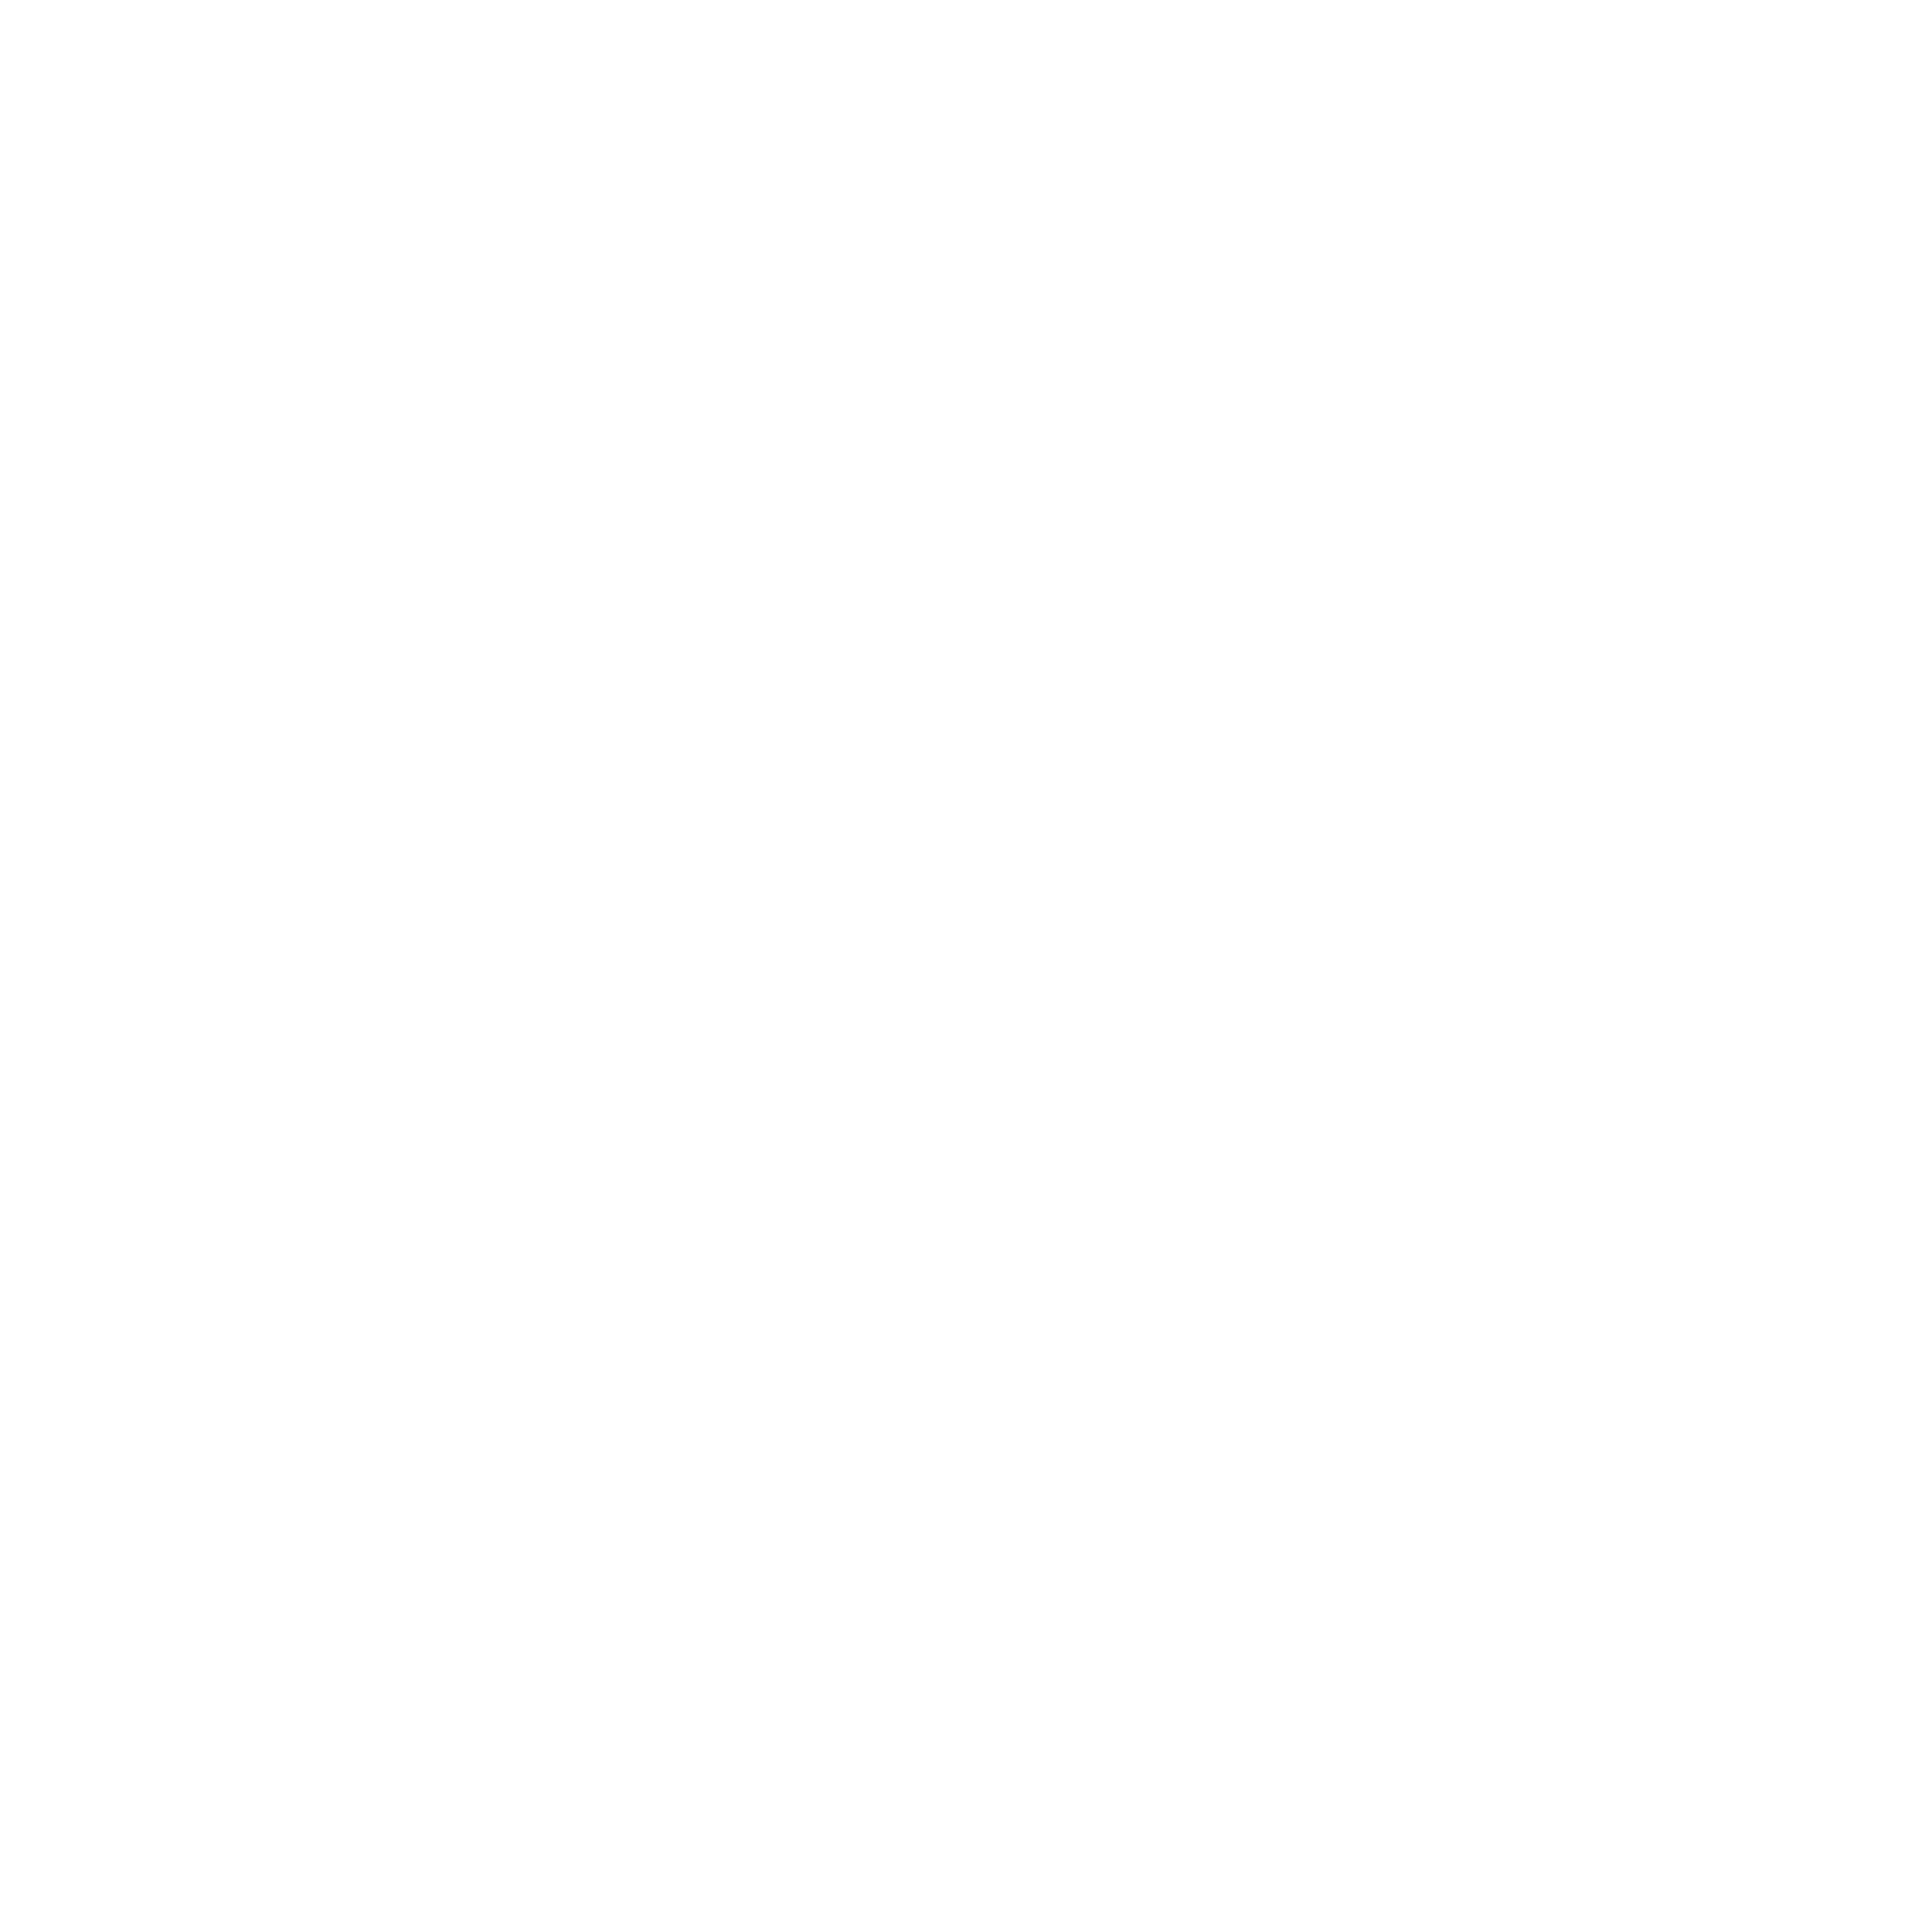 Wagerr Cryptocurrency icon